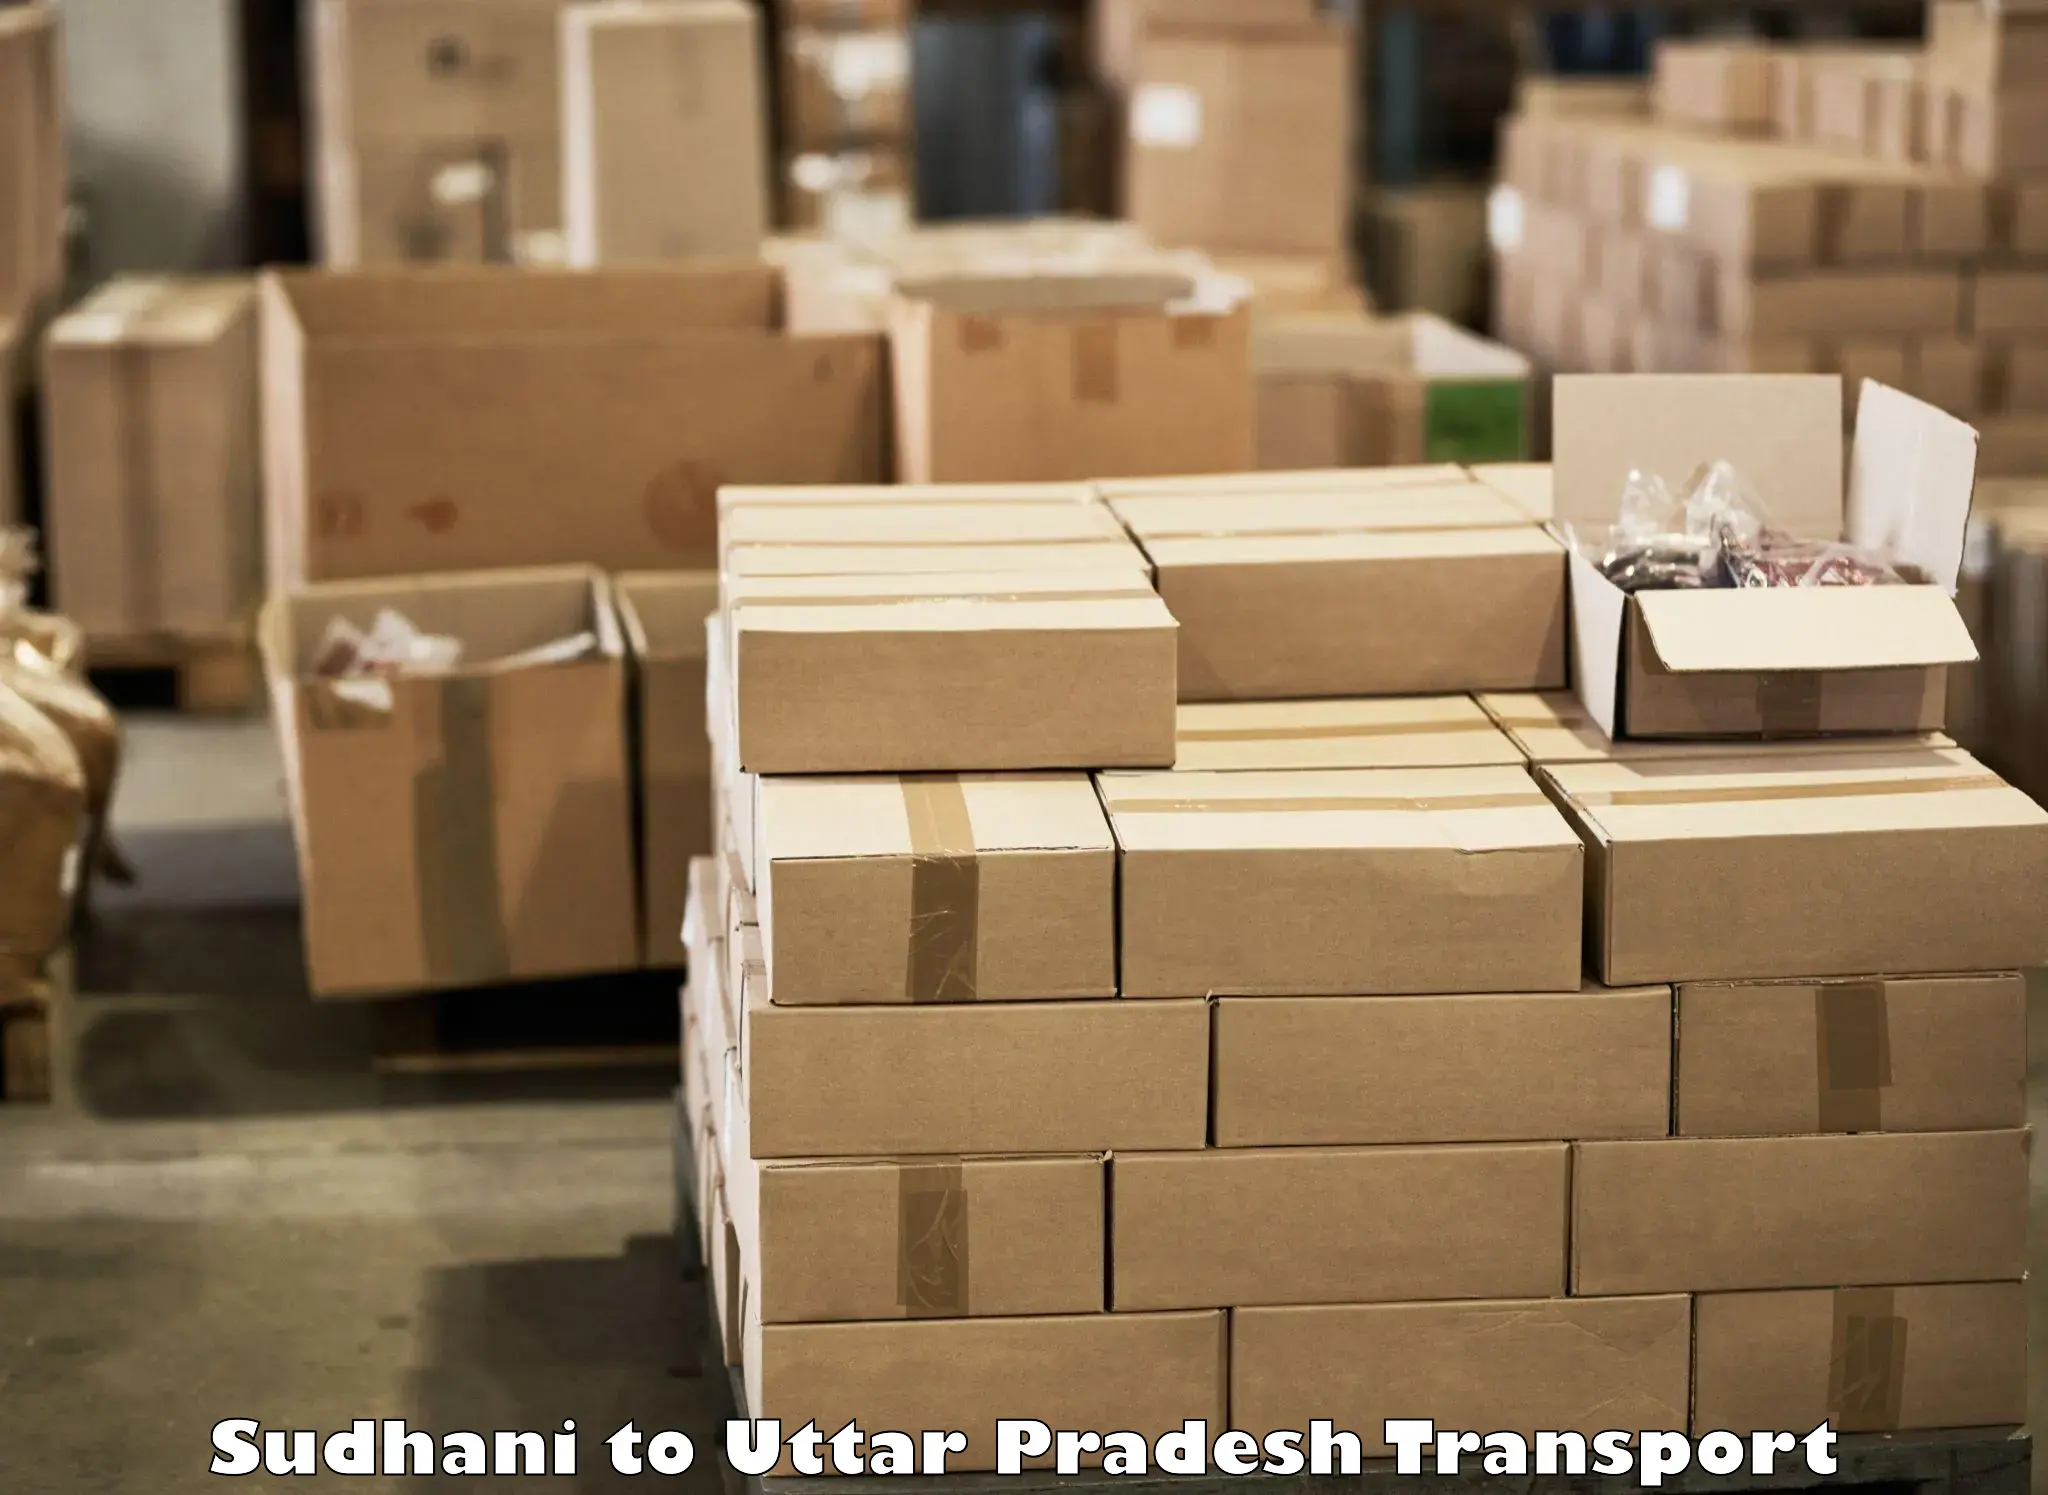 Best transport services in India Sudhani to Ambedkar Nagar